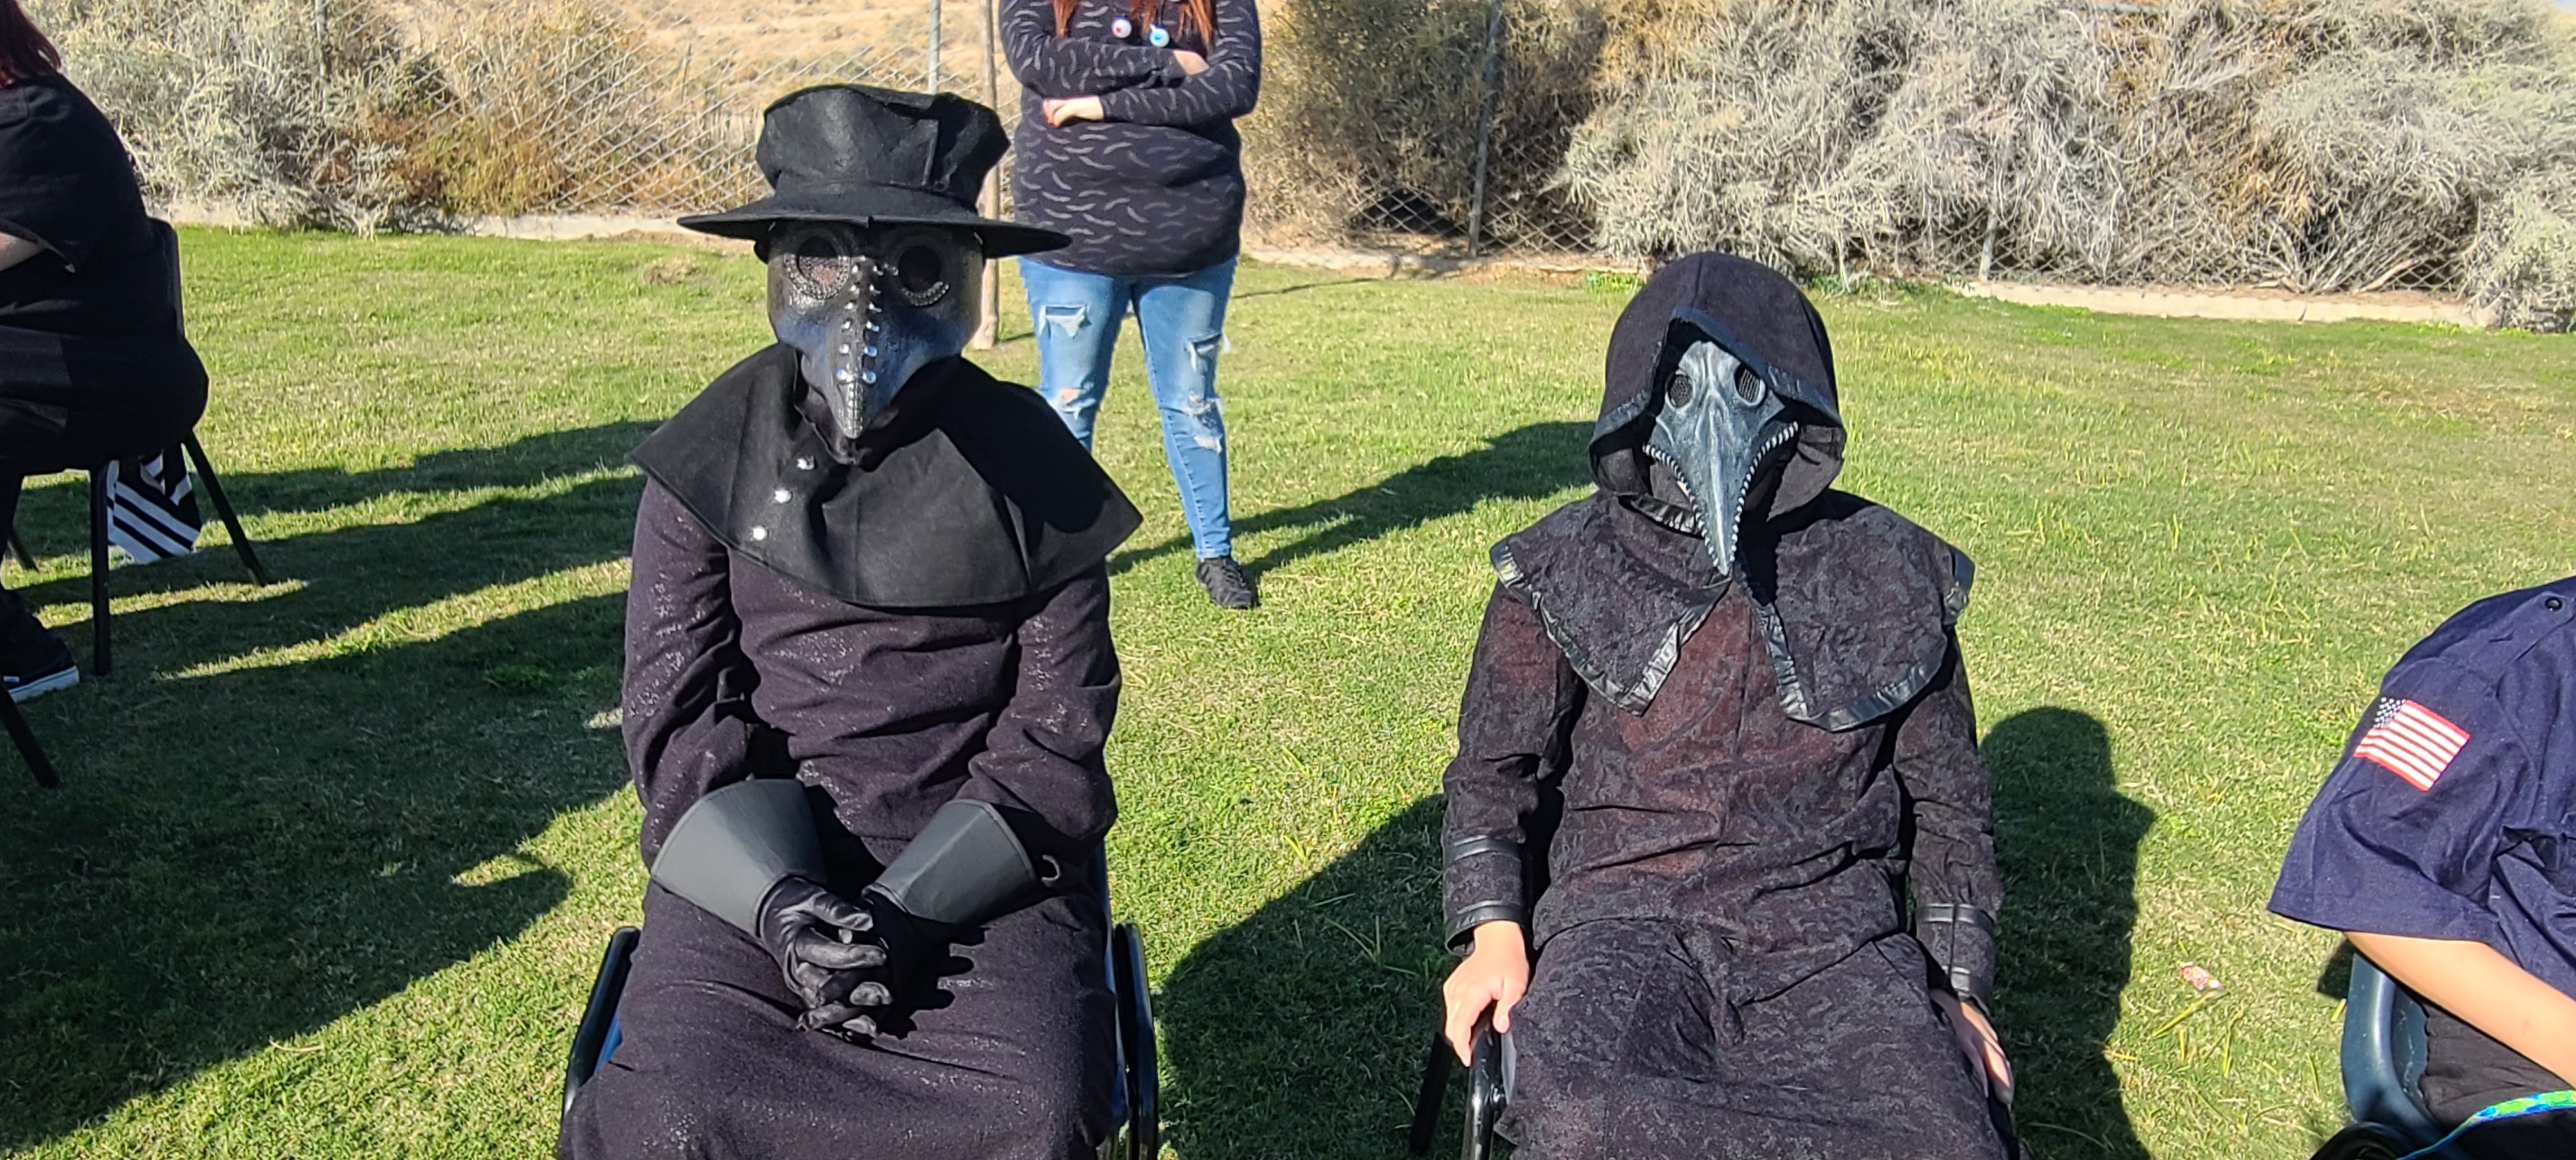 Plague doctor costumes